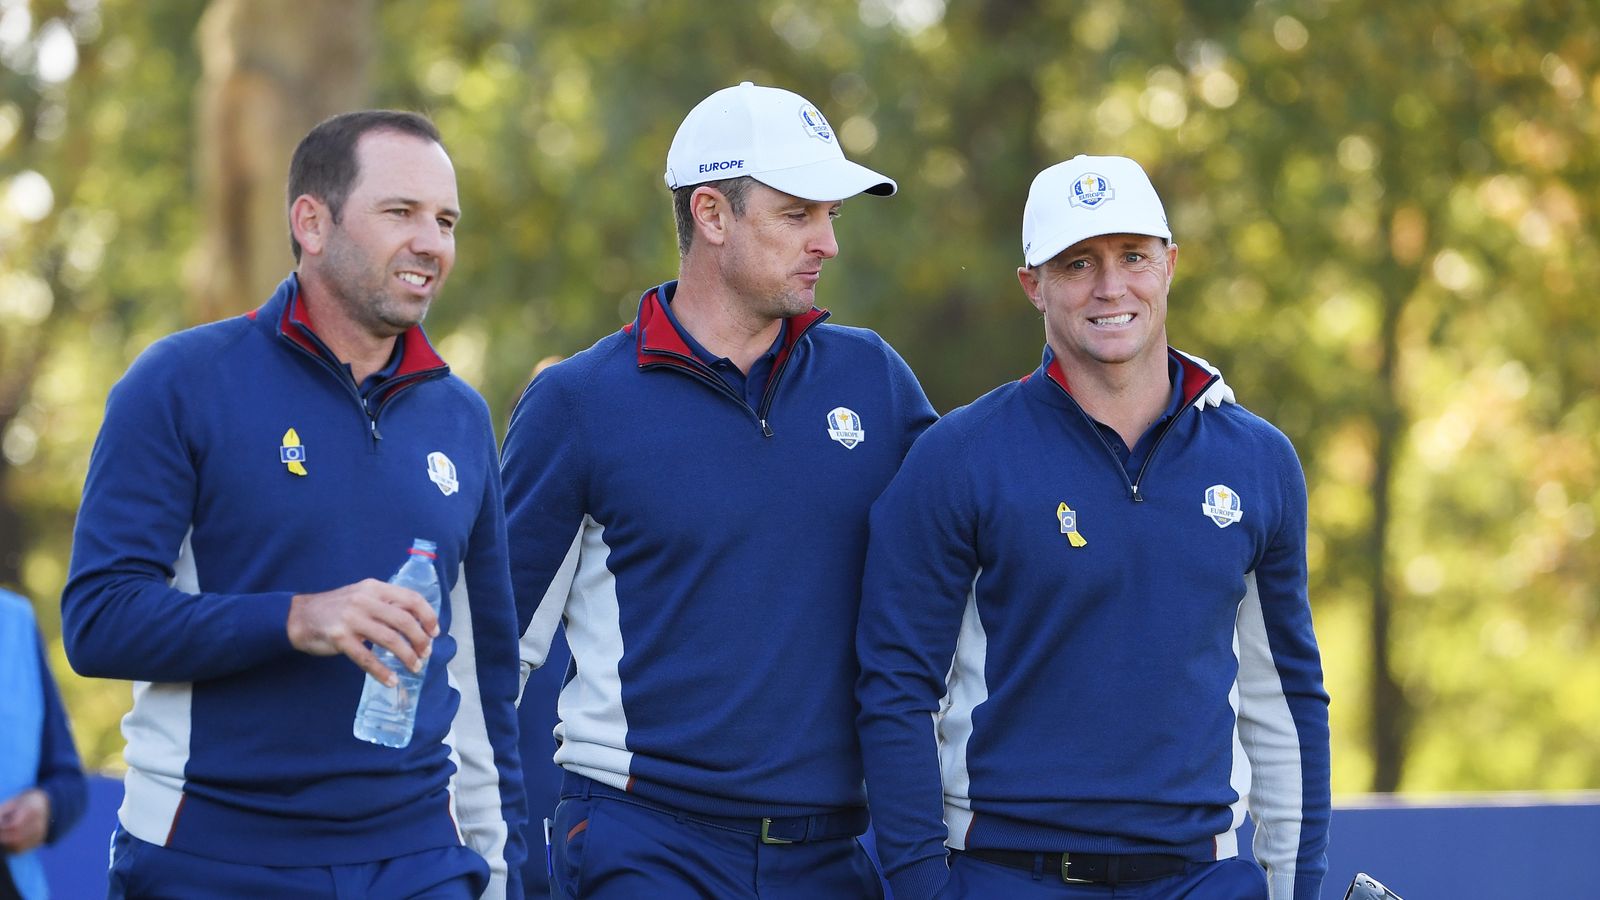 Ryder Cup Sky Live coverage of Thursday's Captain's Match and Opening